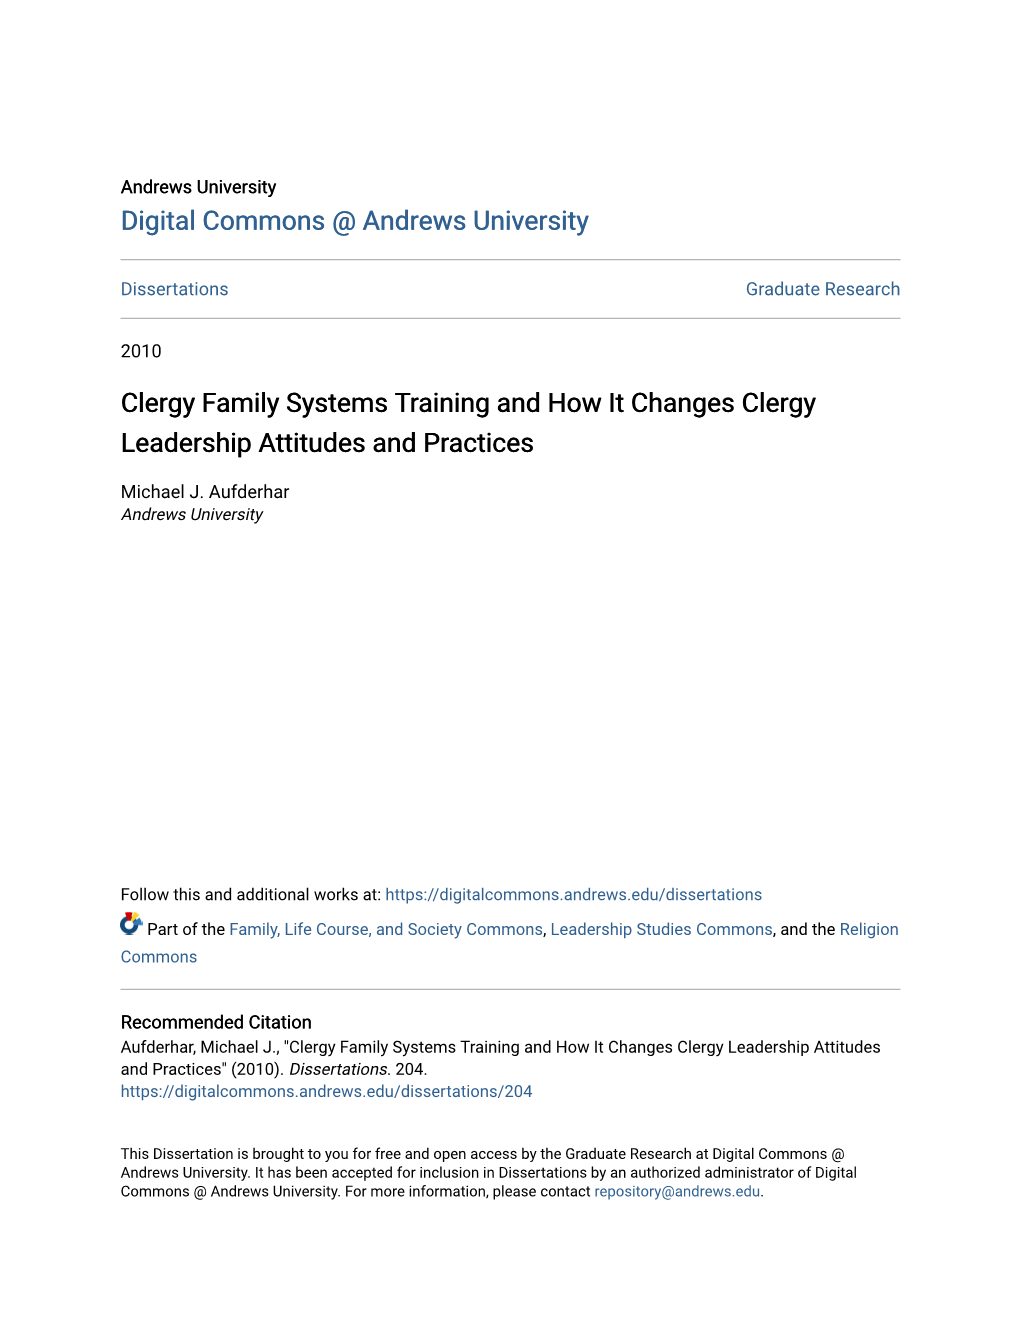 Clergy Family Systems Training and How It Changes Clergy Leadership Attitudes and Practices